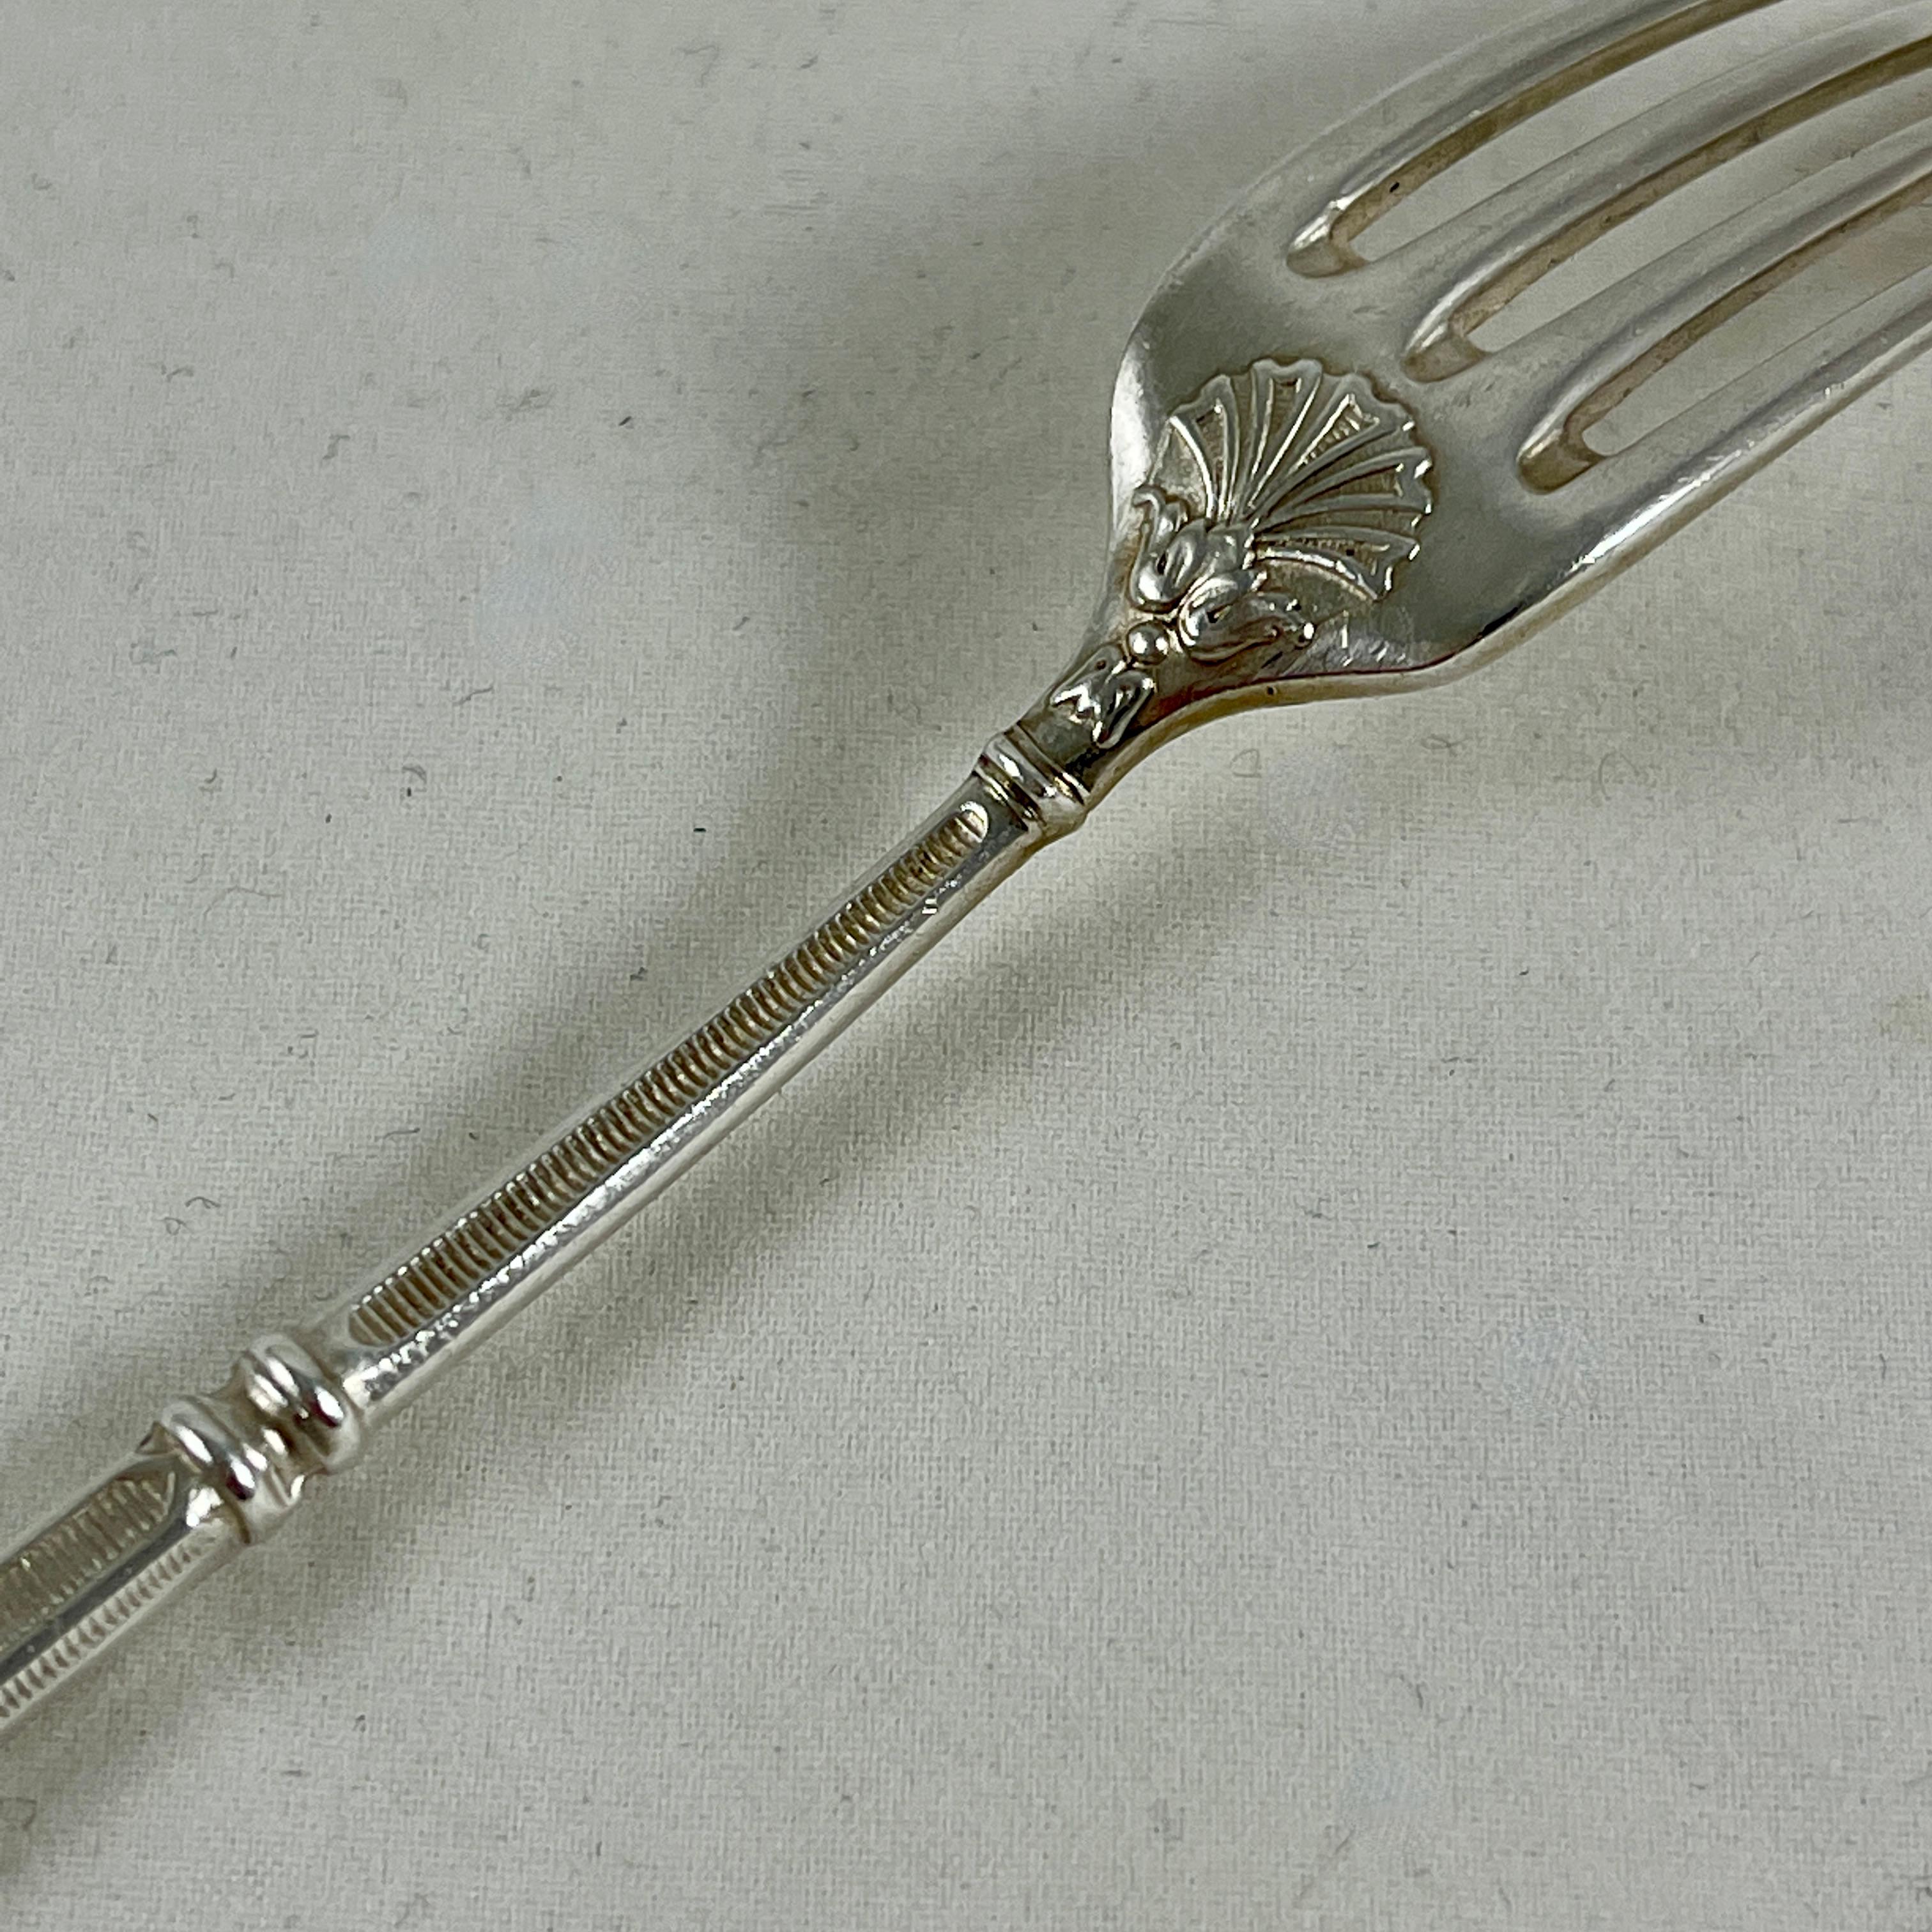 Second Empire French Napoleon III Silver Plate Ornate Dessert Forks, S/11 For Sale 5